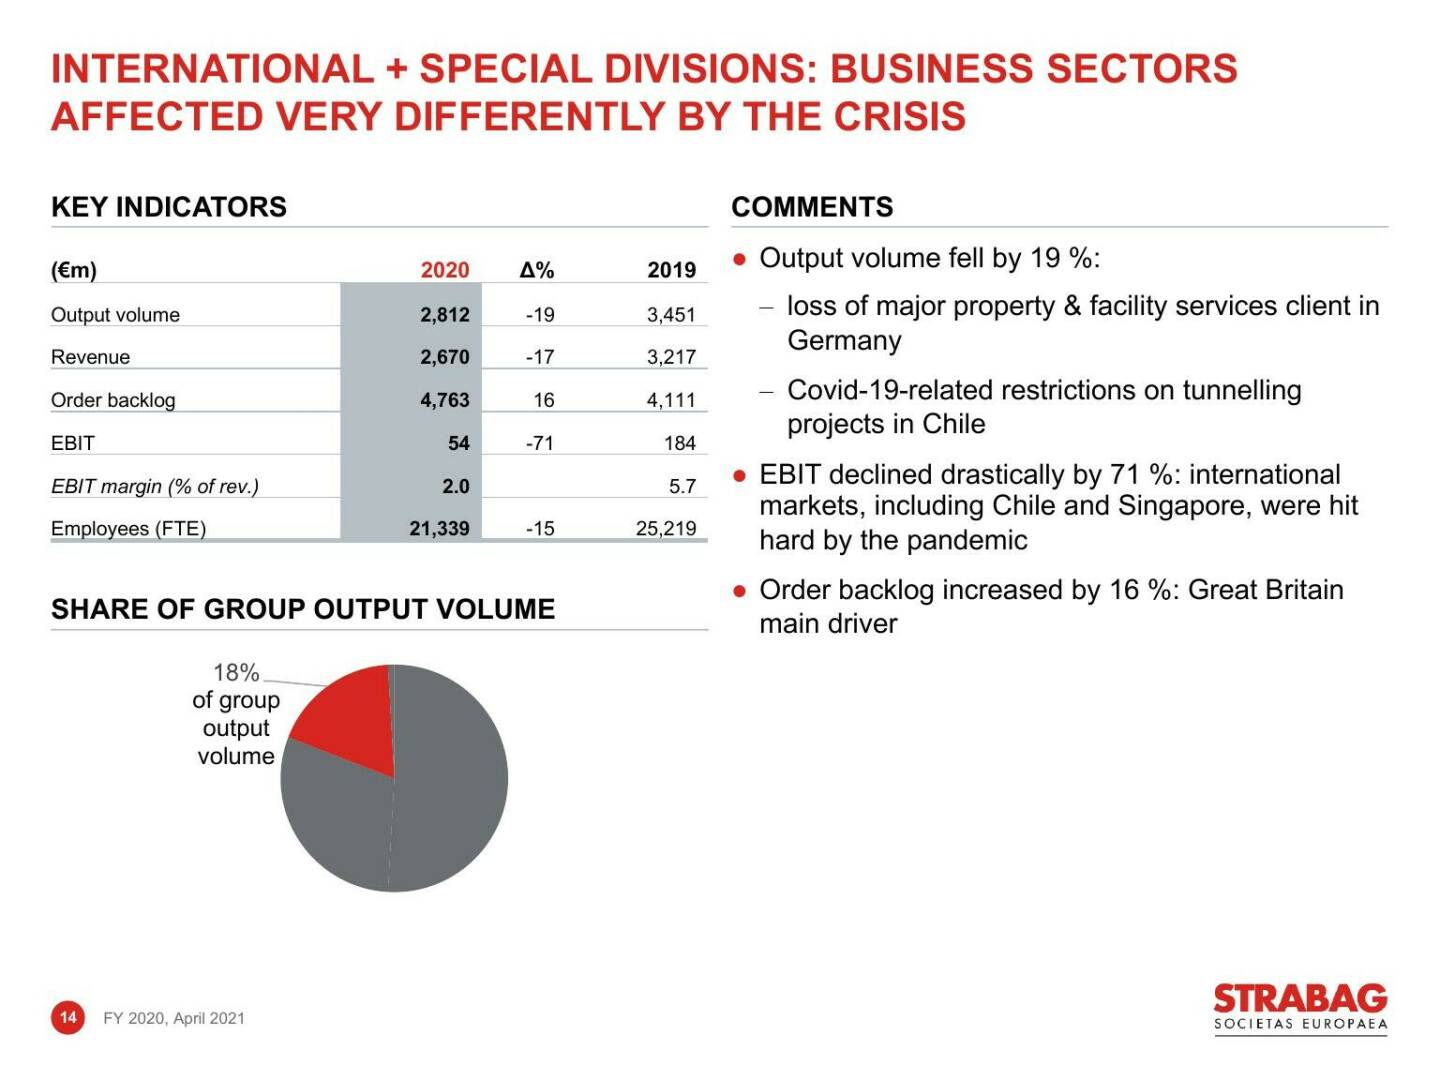 Strabag - International + special divisions: business sectos affected very differently by the crisis